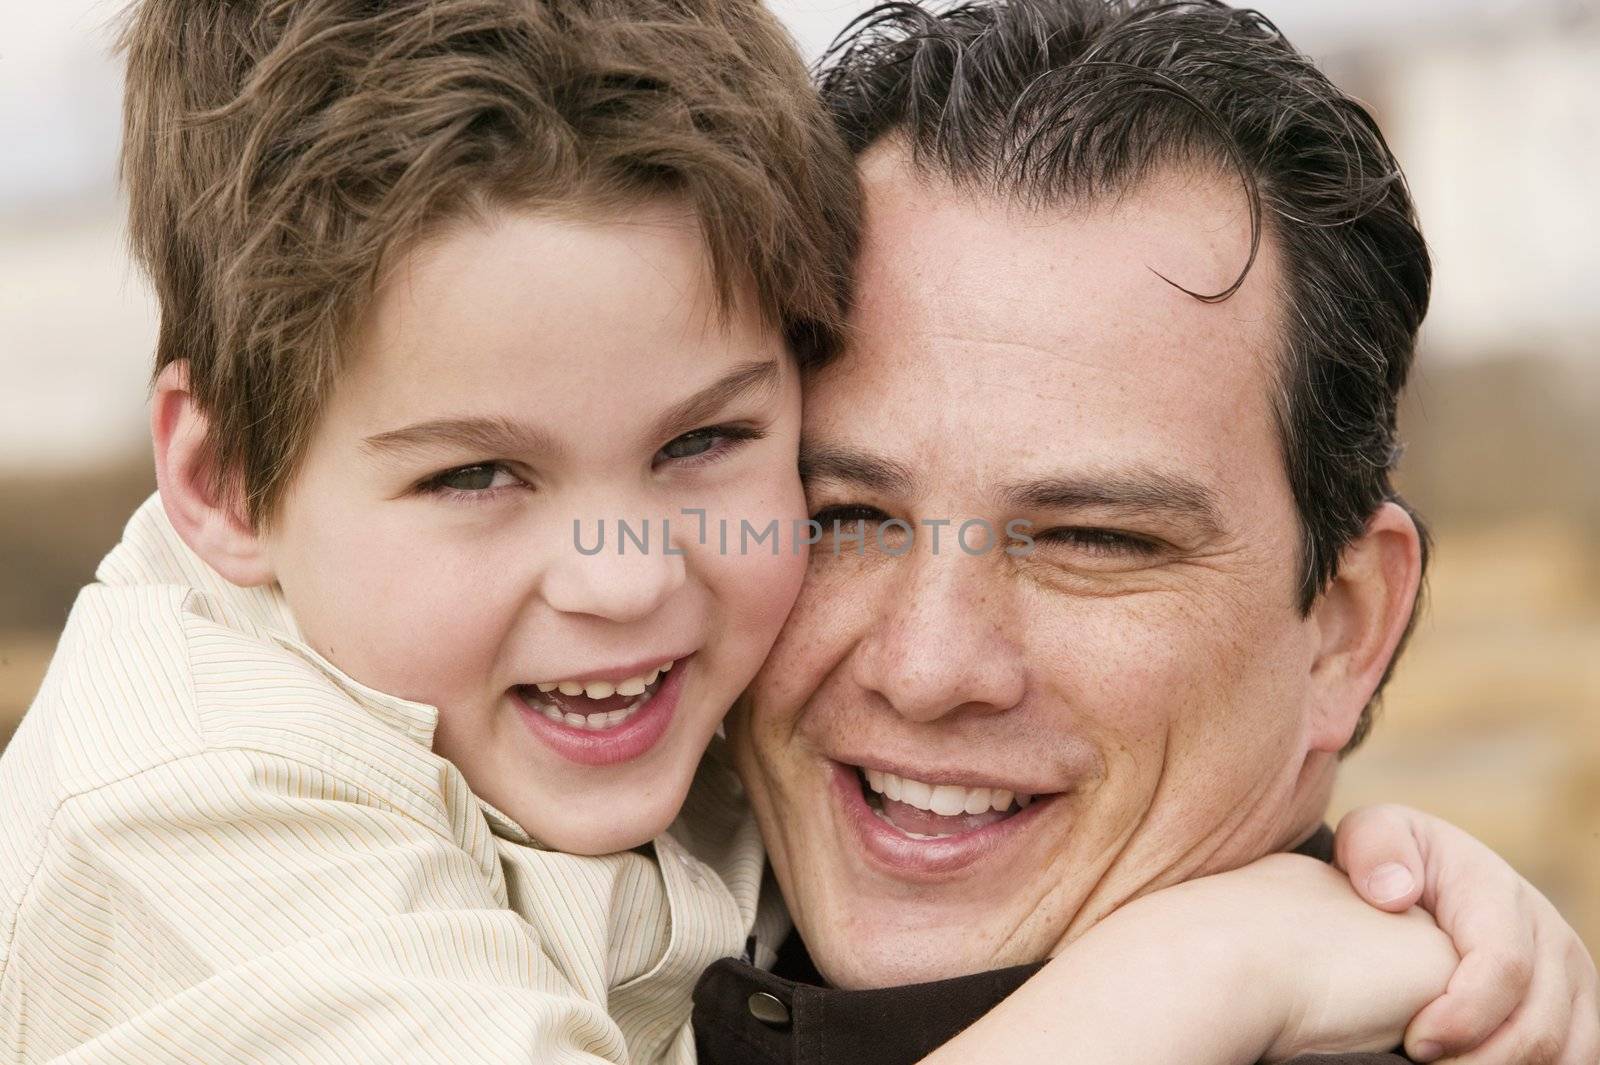 Portrait of a young boy hugging a man and laughing